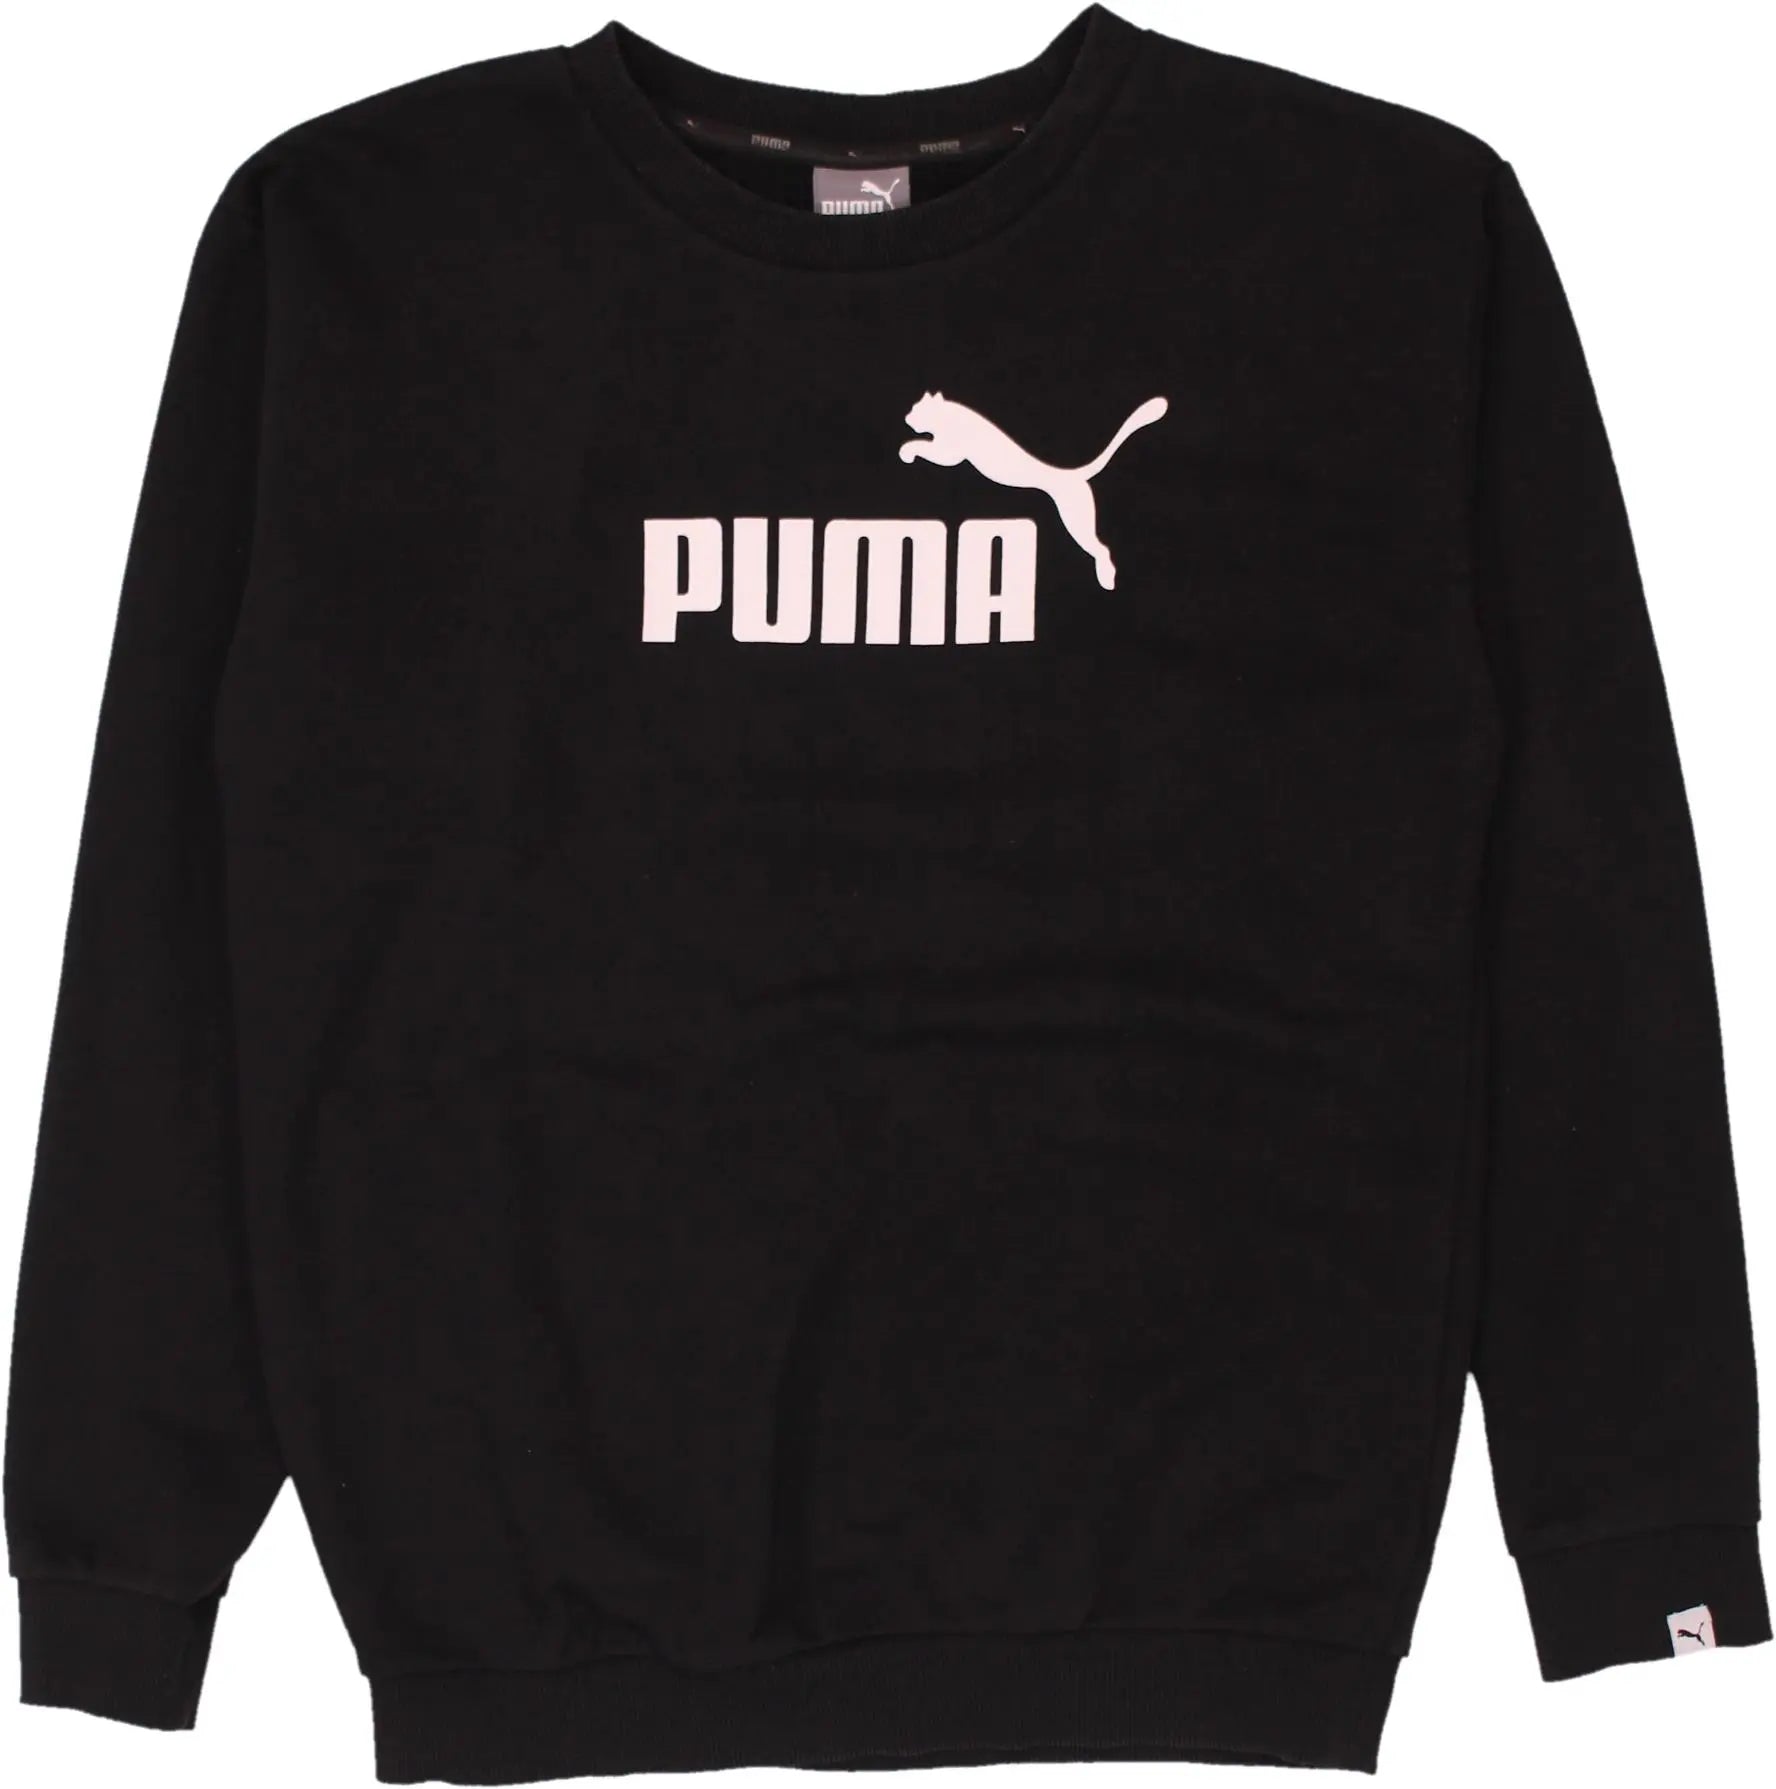 Puma - Black Sweater by Puma- ThriftTale.com - Vintage and second handclothing